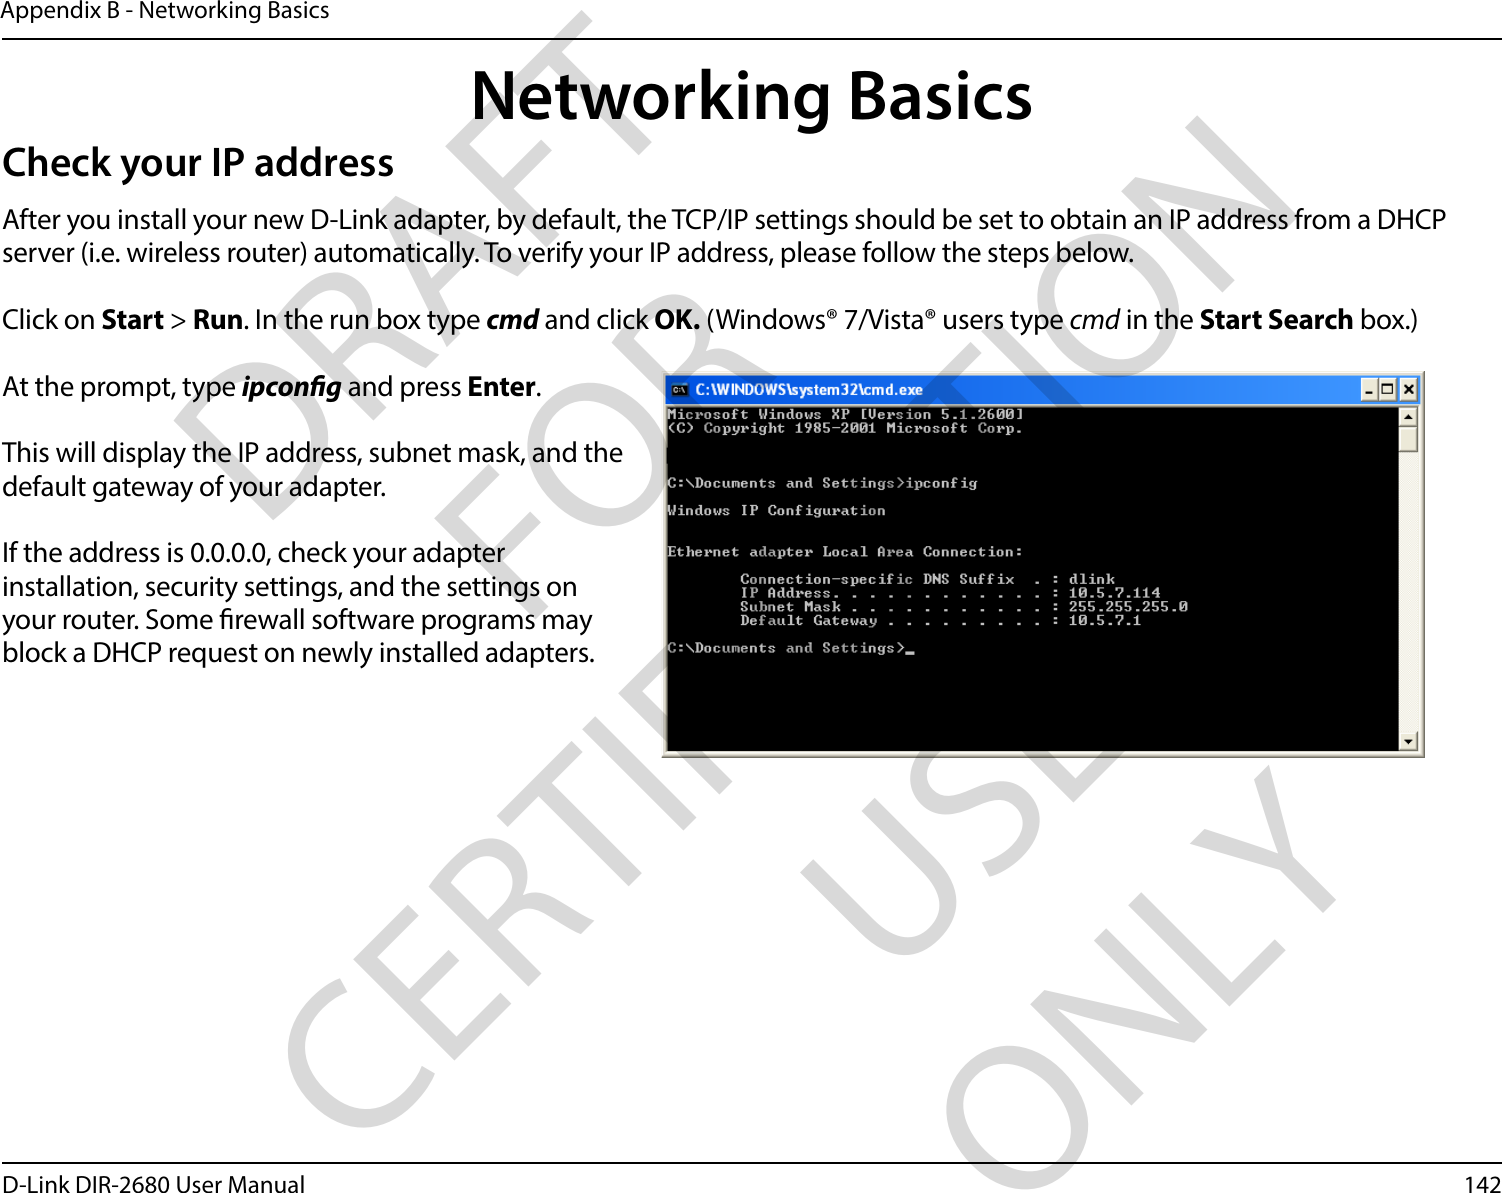 142D-Link DIR-2680 User ManualAppendix B - Networking BasicsNetworking BasicsCheck your IP addressAfter you install your new D-Link adapter, by default, the TCP/IP settings should be set to obtain an IP address from a DHCP server (i.e. wireless router) automatically. To verify your IP address, please follow the steps below.Click on Start &gt; Run. In the run box type cmd and click OK. (Windows® 7/Vista® users type cmd in the Start Search box.)At the prompt, type ipcong and press Enter.This will display the IP address, subnet mask, and the default gateway of your adapter.If the address is 0.0.0.0, check your adapter installation, security settings, and the settings on your router. Some rewall software programs may block a DHCP request on newly installed adapters. DRAFT FOR CERTIFICATION USE ONLY